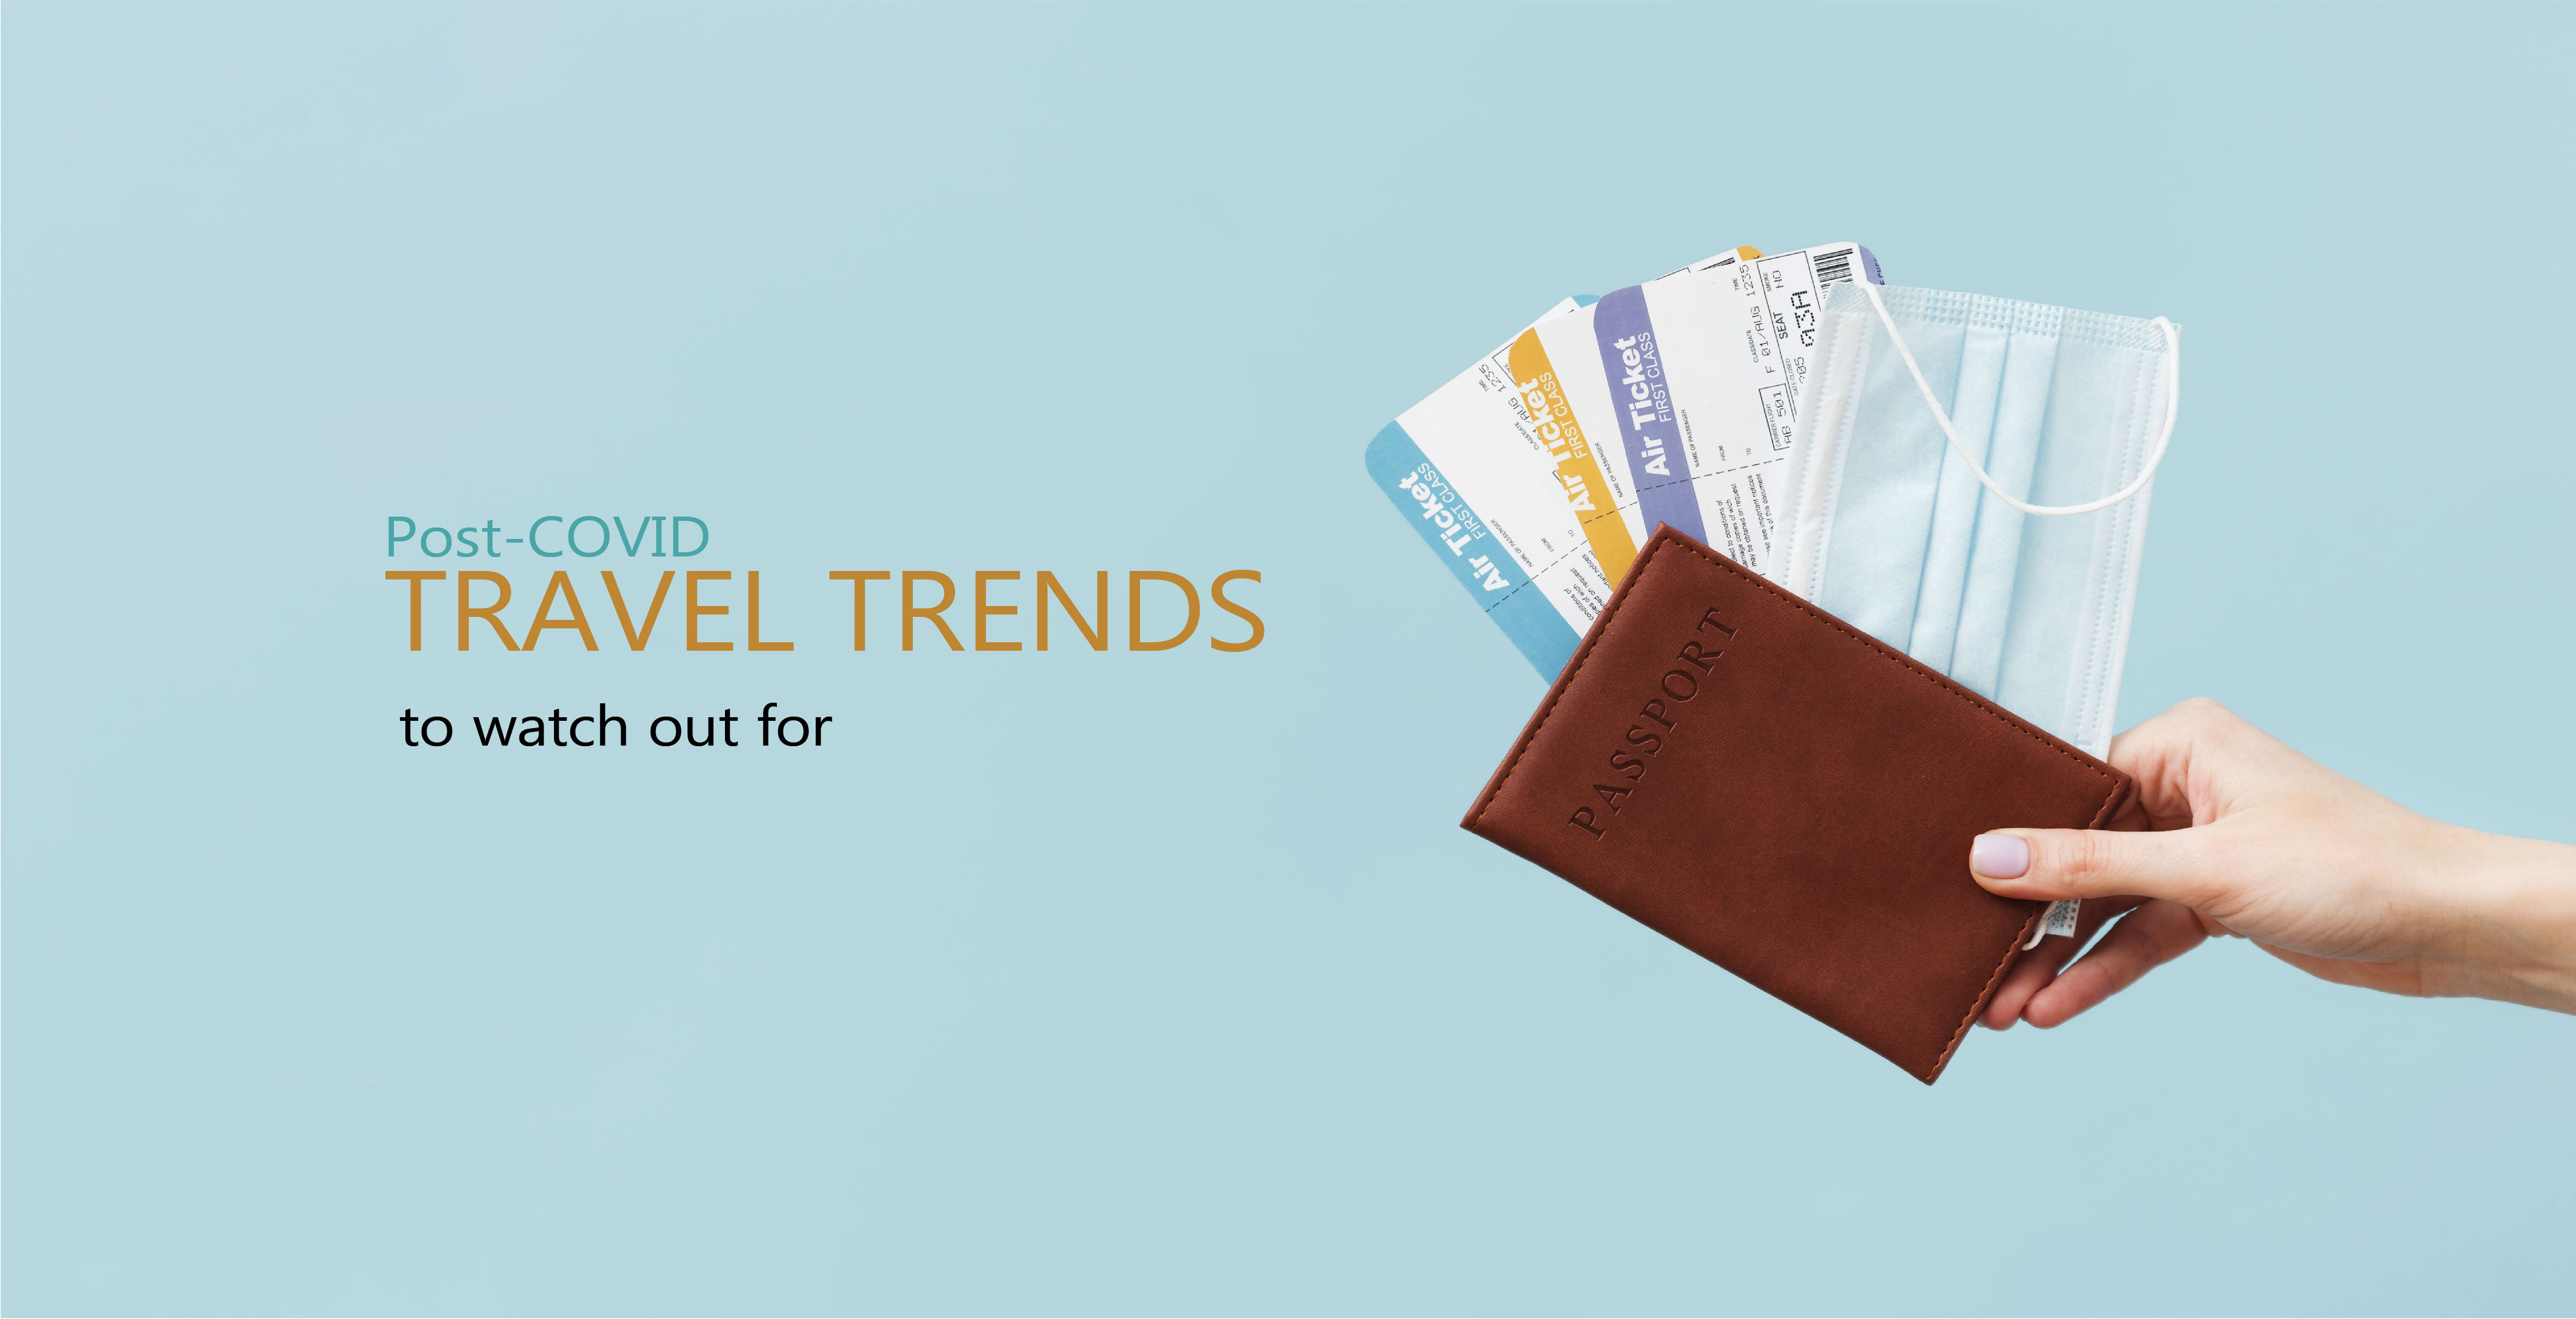 Post-COVID Travel Trends to Watch Out for